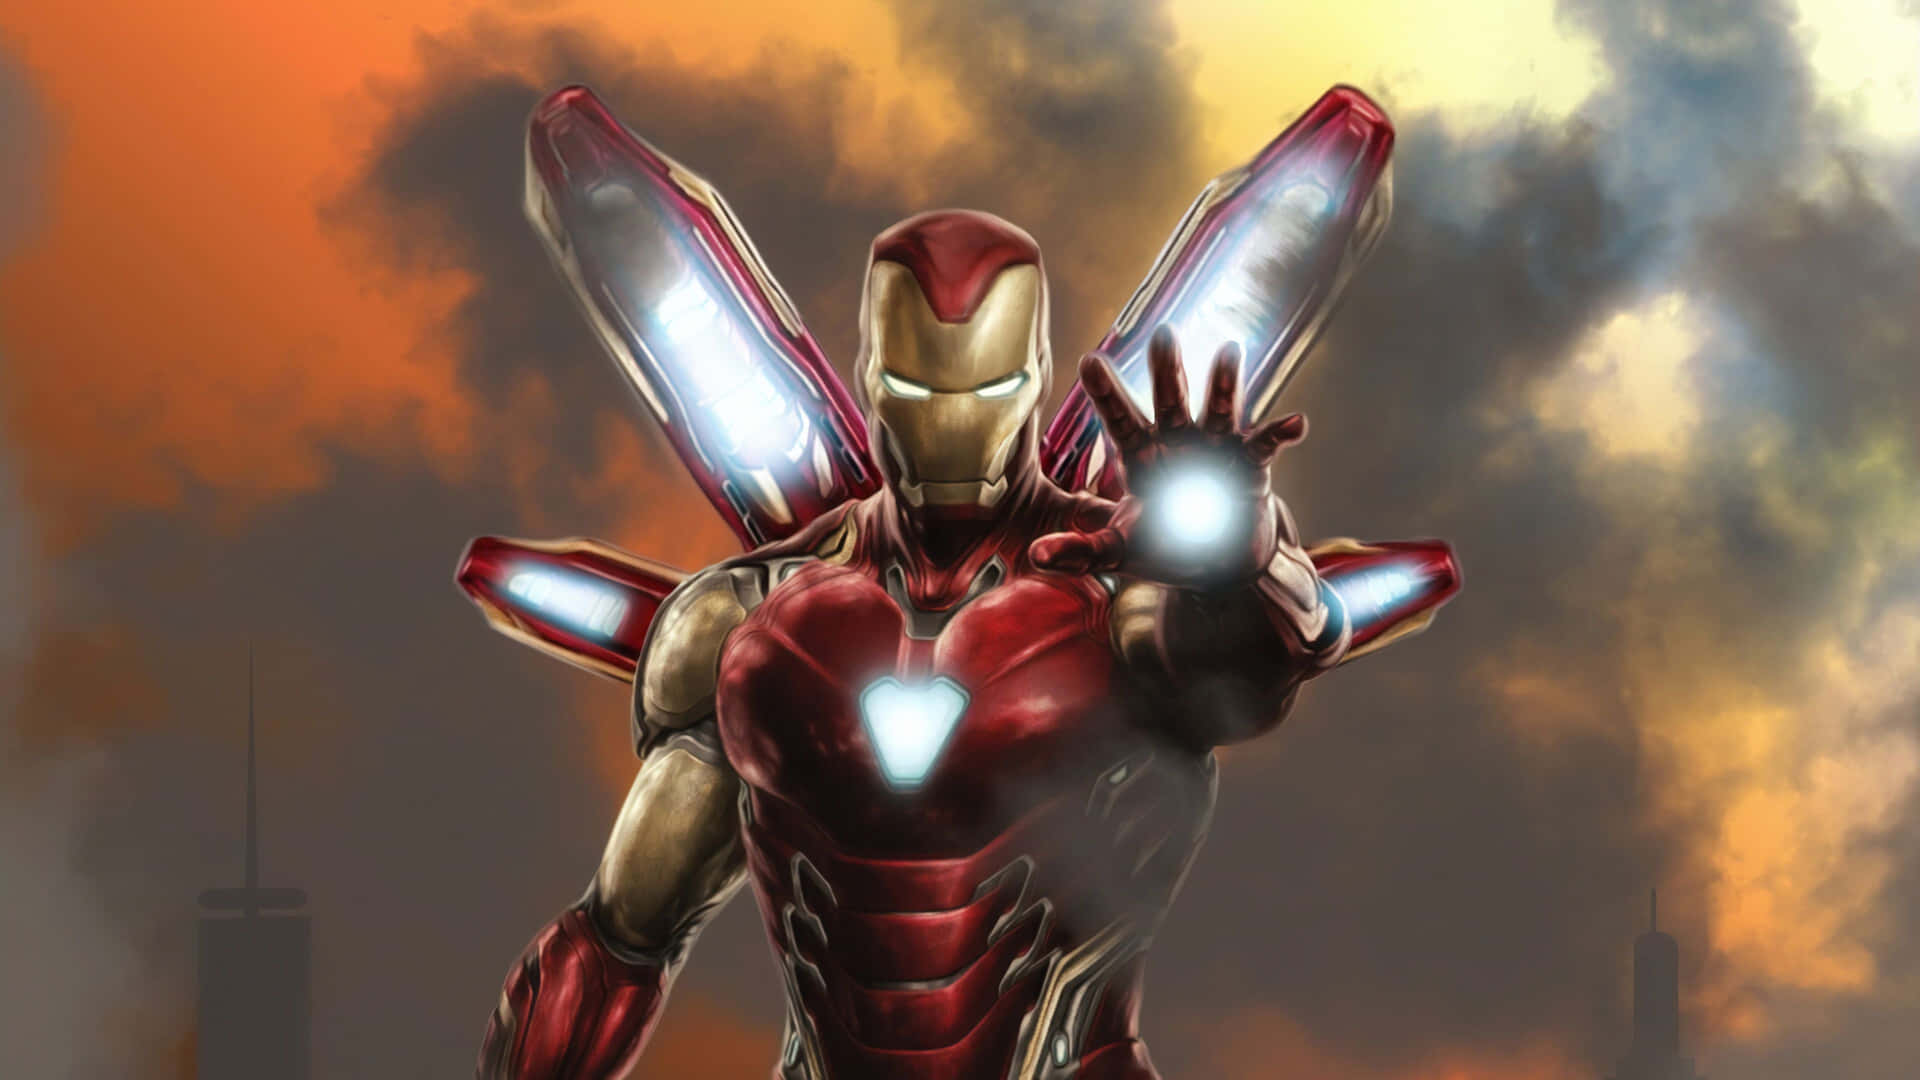 Get Your Own Iron Man Suit! Wallpaper